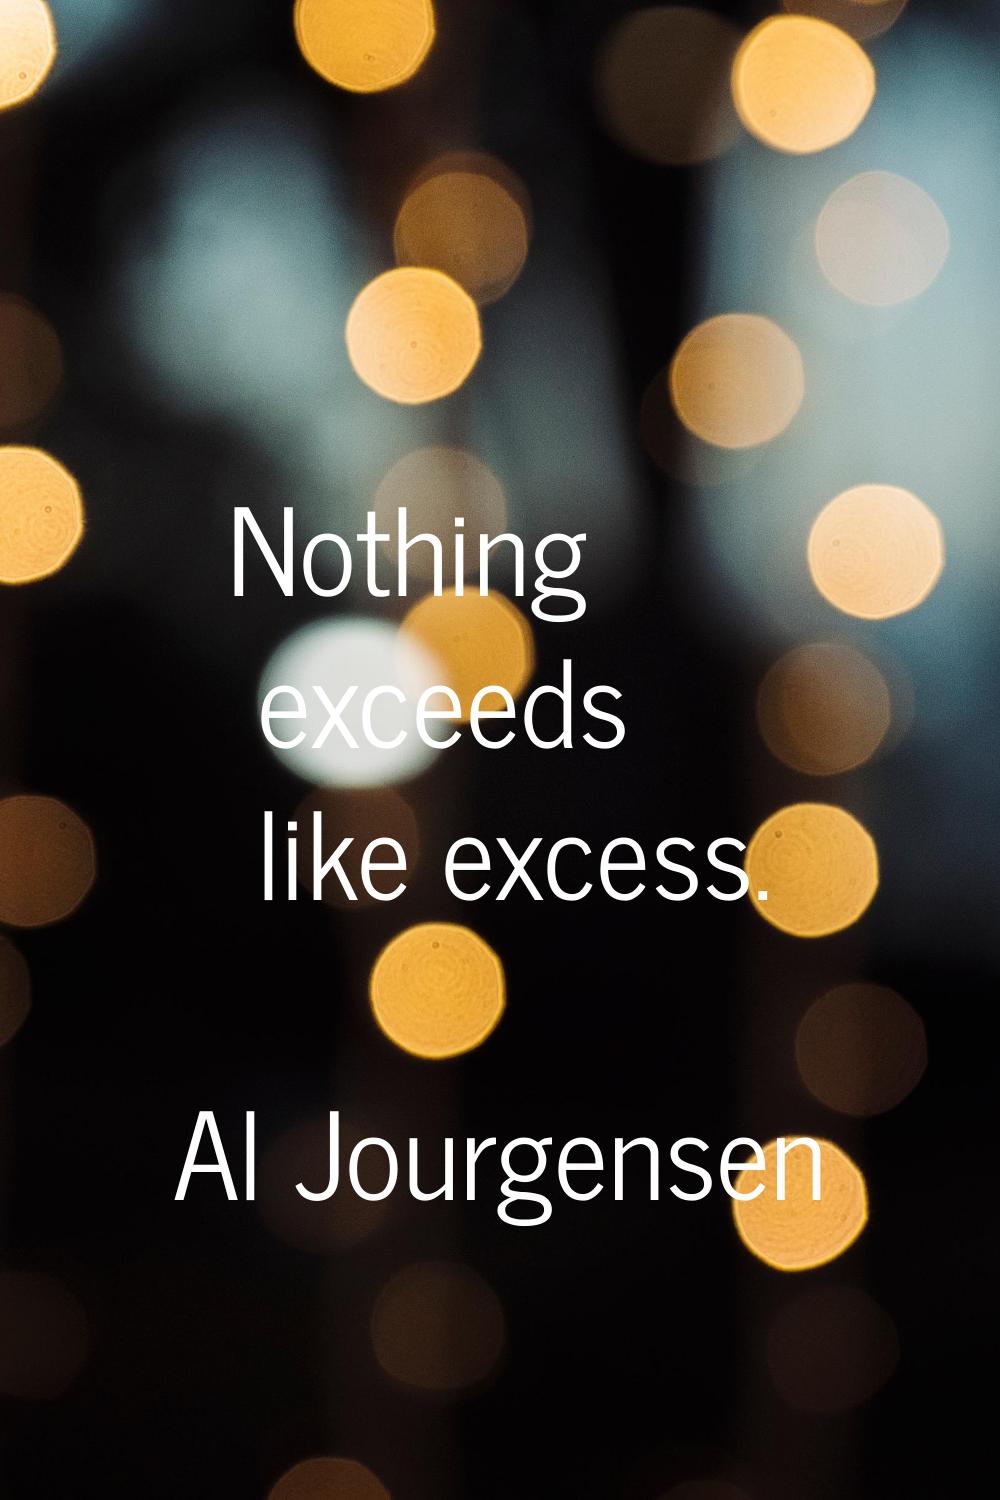 Nothing exceeds like excess.